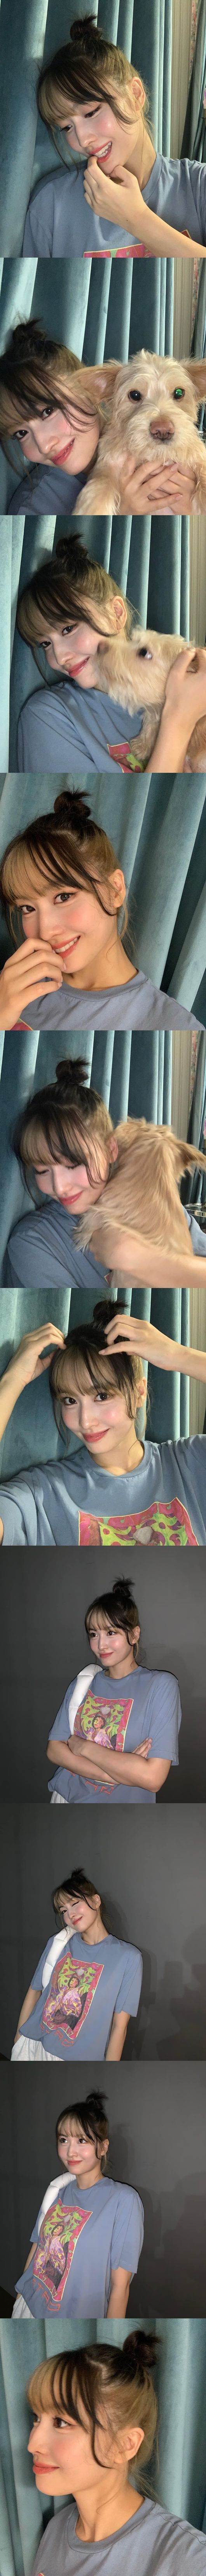 TWICE MOMO flaunts flawless beautyOn the 11th, TWICE official Instagram posted several MOMO photos along with moon-shaped emoticons.The photo shows the MOMO, which is tied up with his head up, looking at the camera with various expressions. MOMO added freshness with pink ball touch and shining Skins.In the close-up photos, the flawless Skins without any blemishes caught the attention of fans.On the other hand, the group TWICE, which MOMO belongs to, released a teaser that heralds the release of their first English single The Feels on the 6th, which thrilled many fans.TWICE Instagram